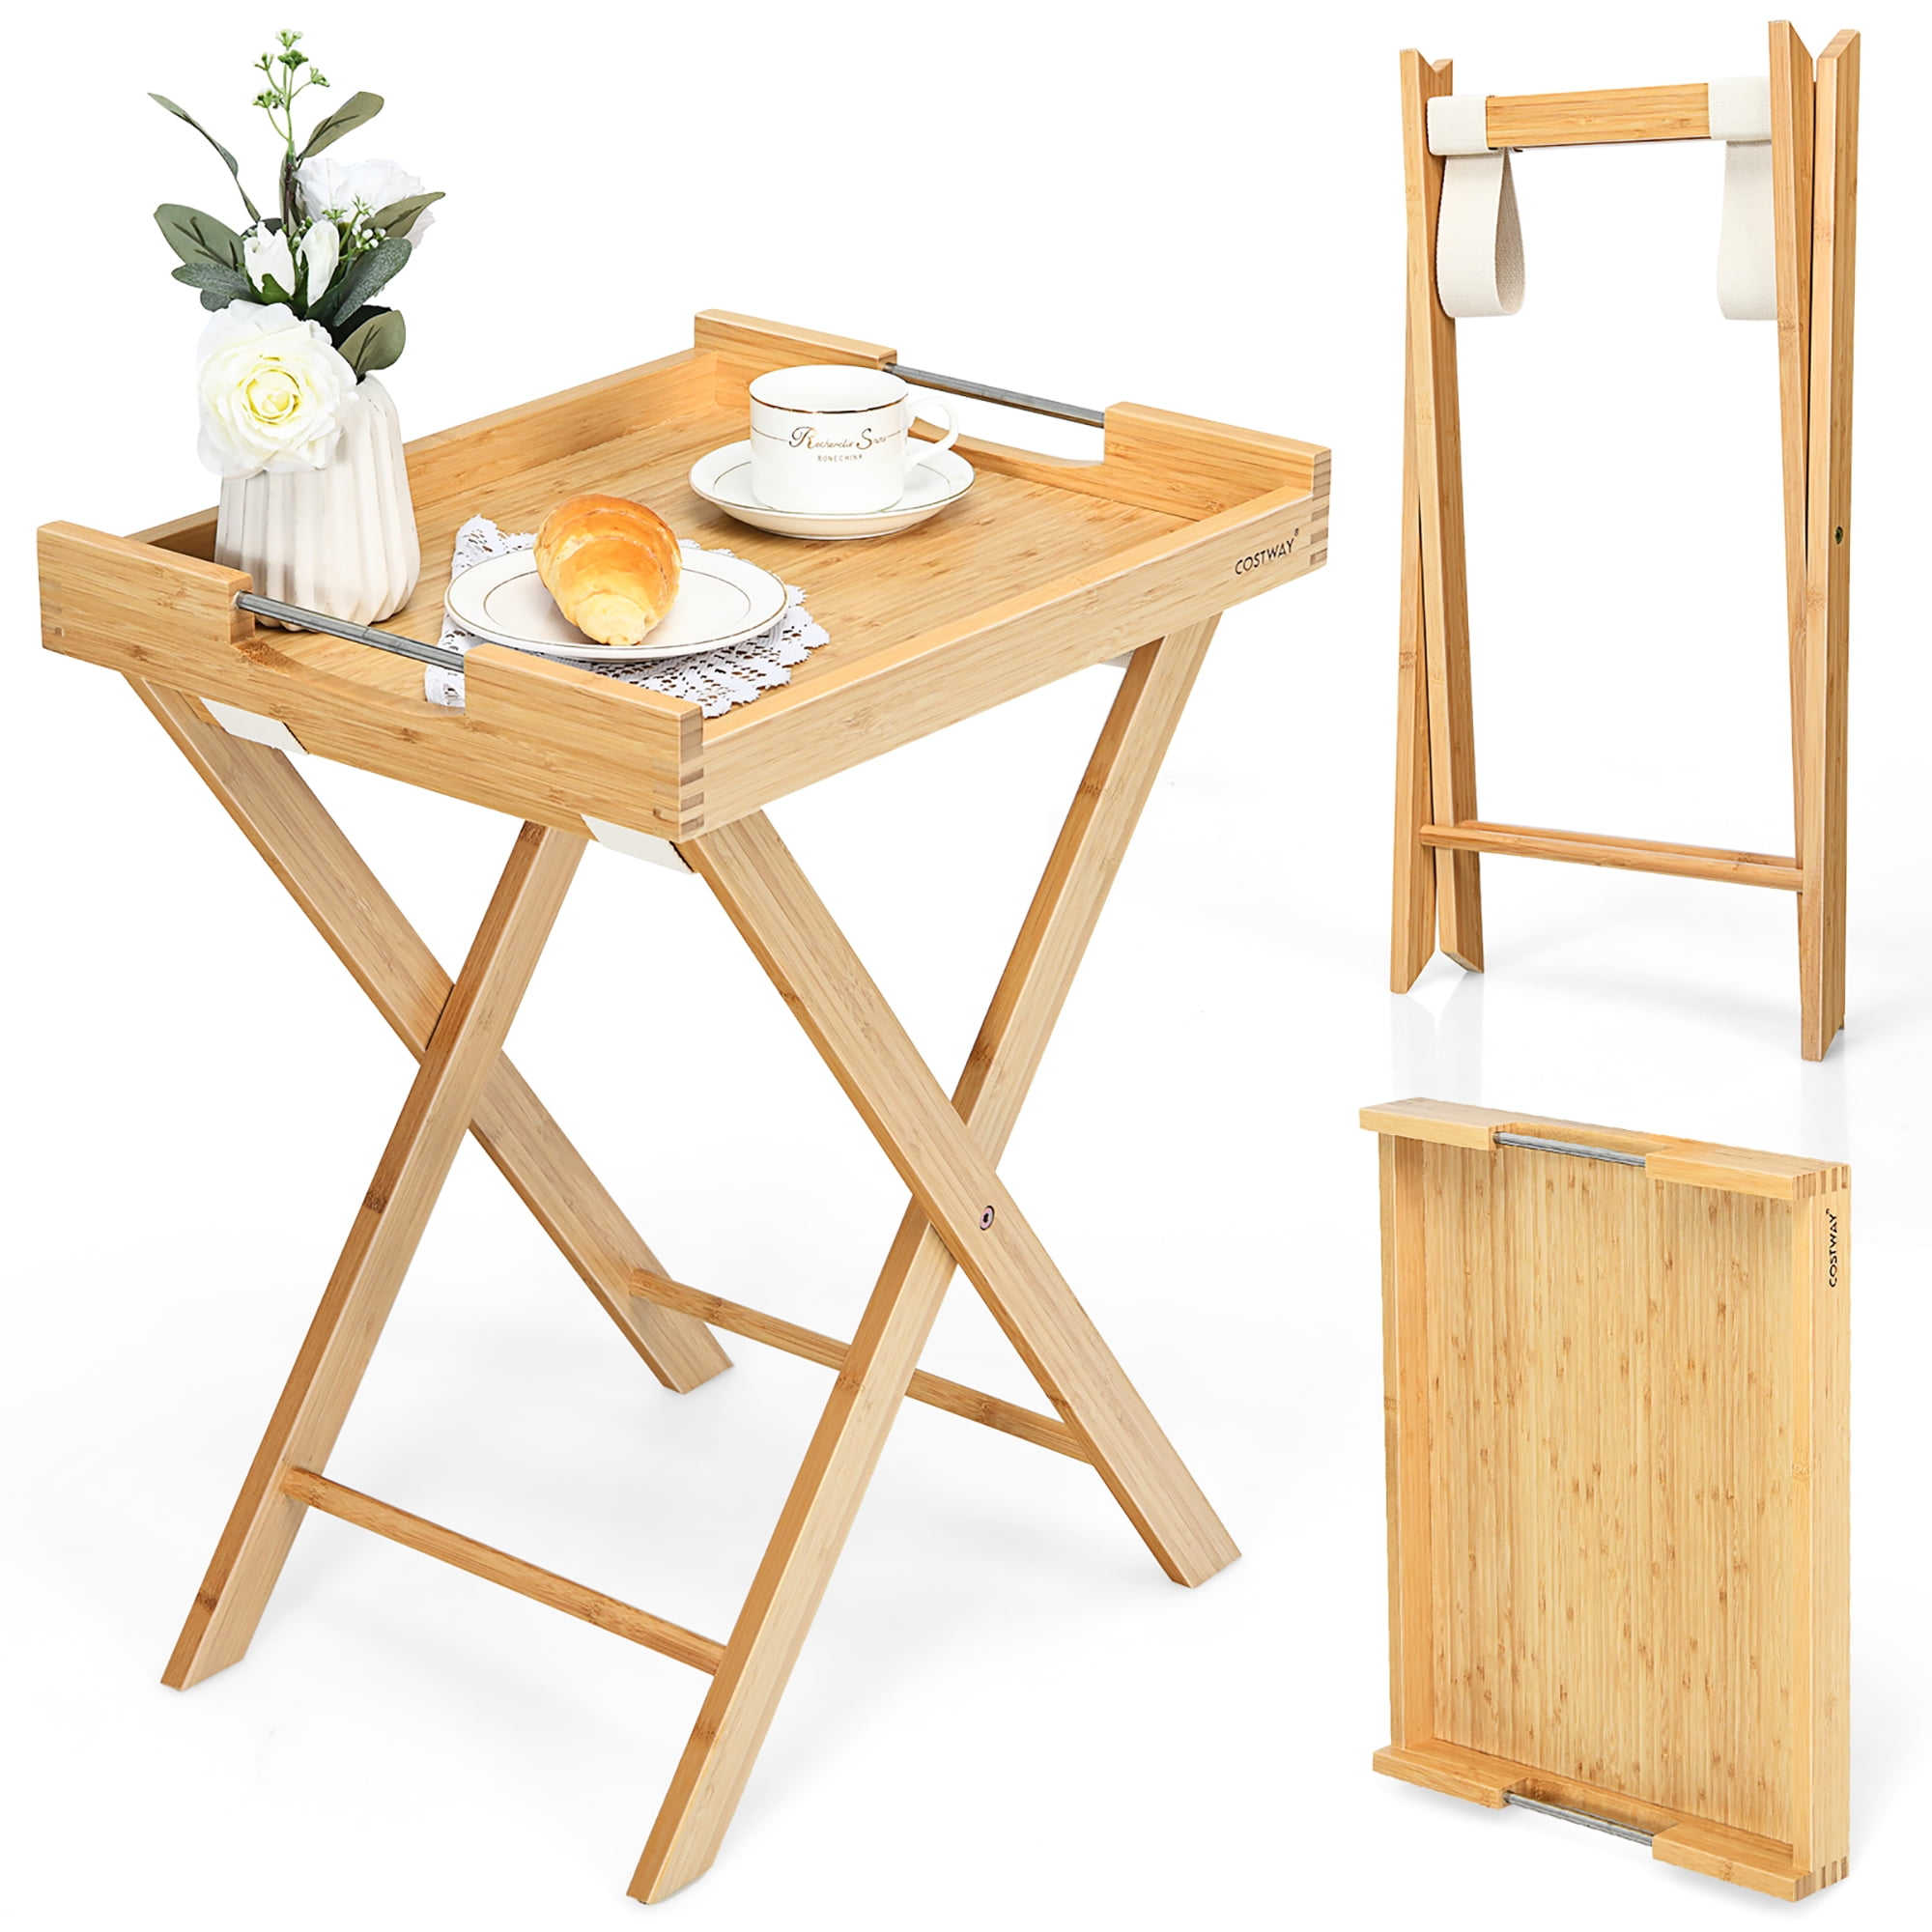 Heavy Duty Bamboo Bed Tray Table With Folding Legs and Handles 18 X 12 by 8 Inch for sale online 